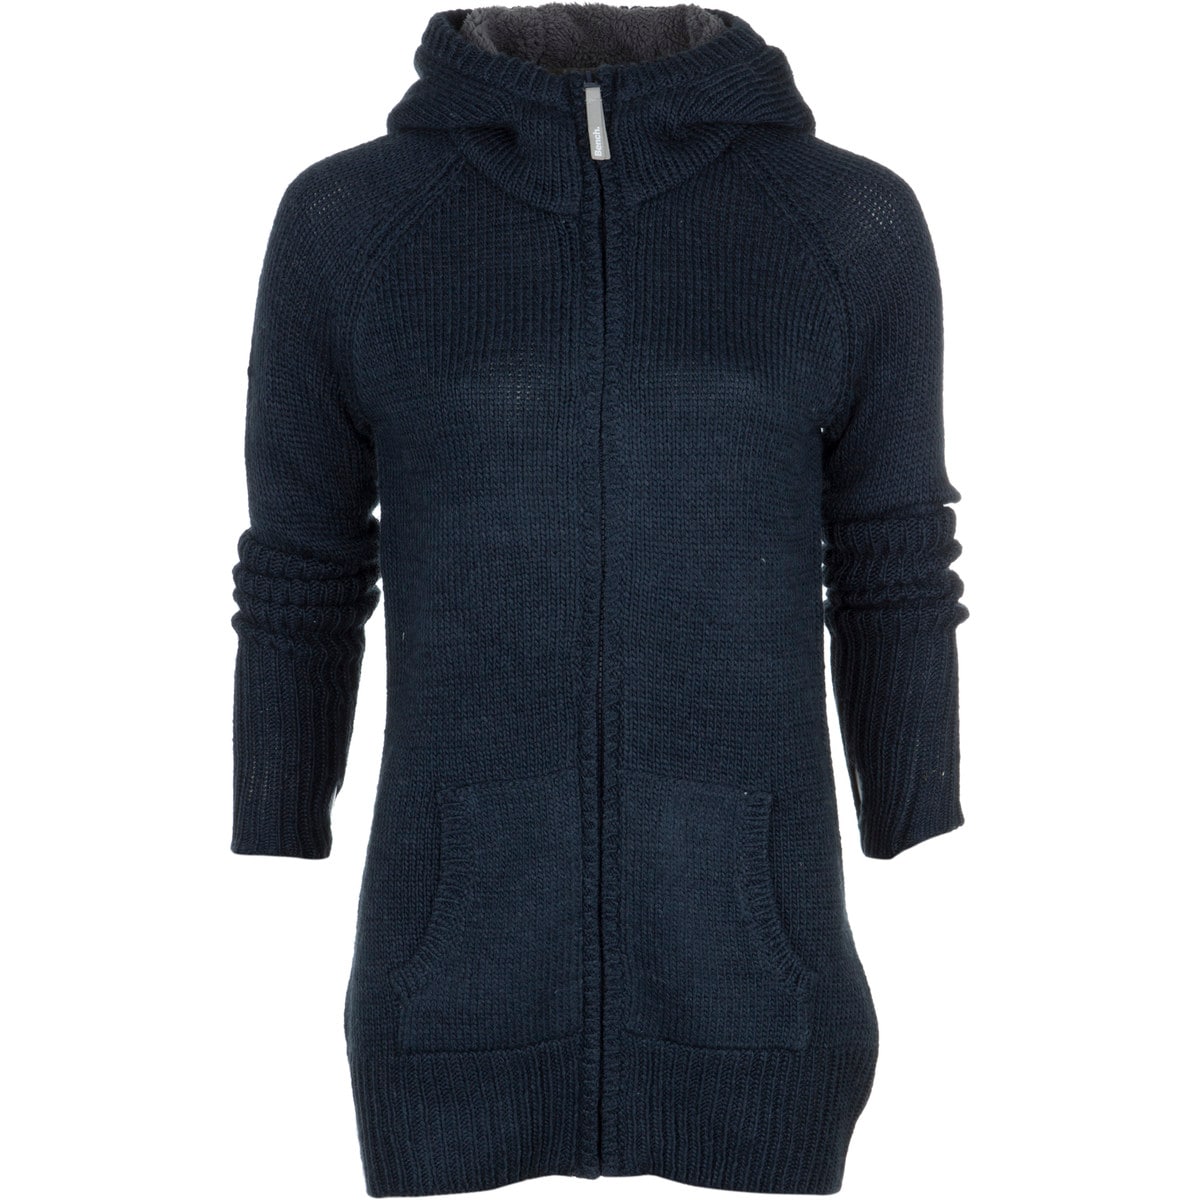 Womens Clothing - Sweaters